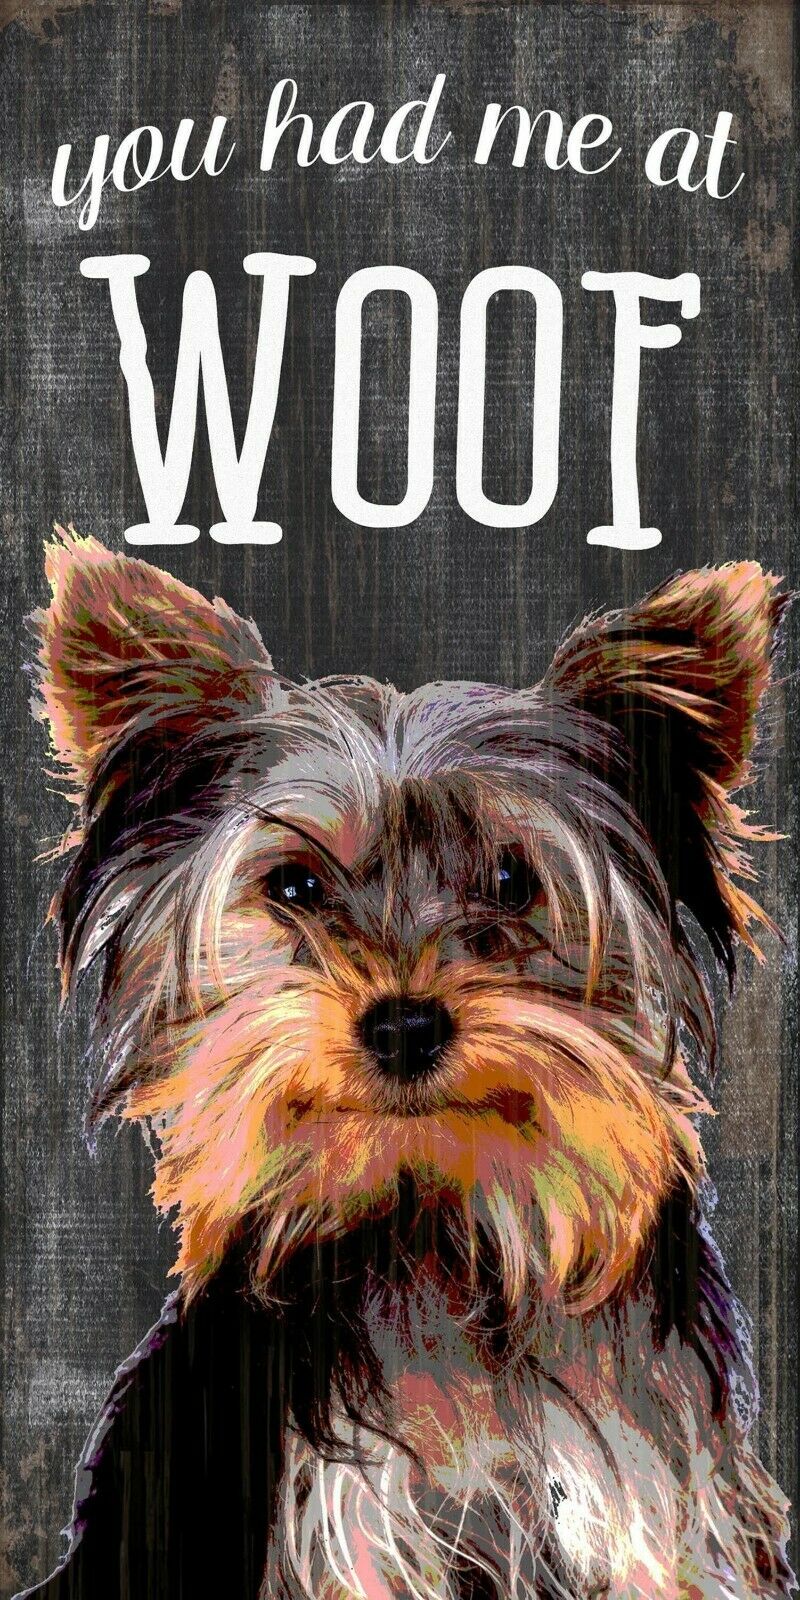 Yorkie Yorkshire Terrier - You Had Me At Woof - Wood Sign - 5 X 10 - Brand New